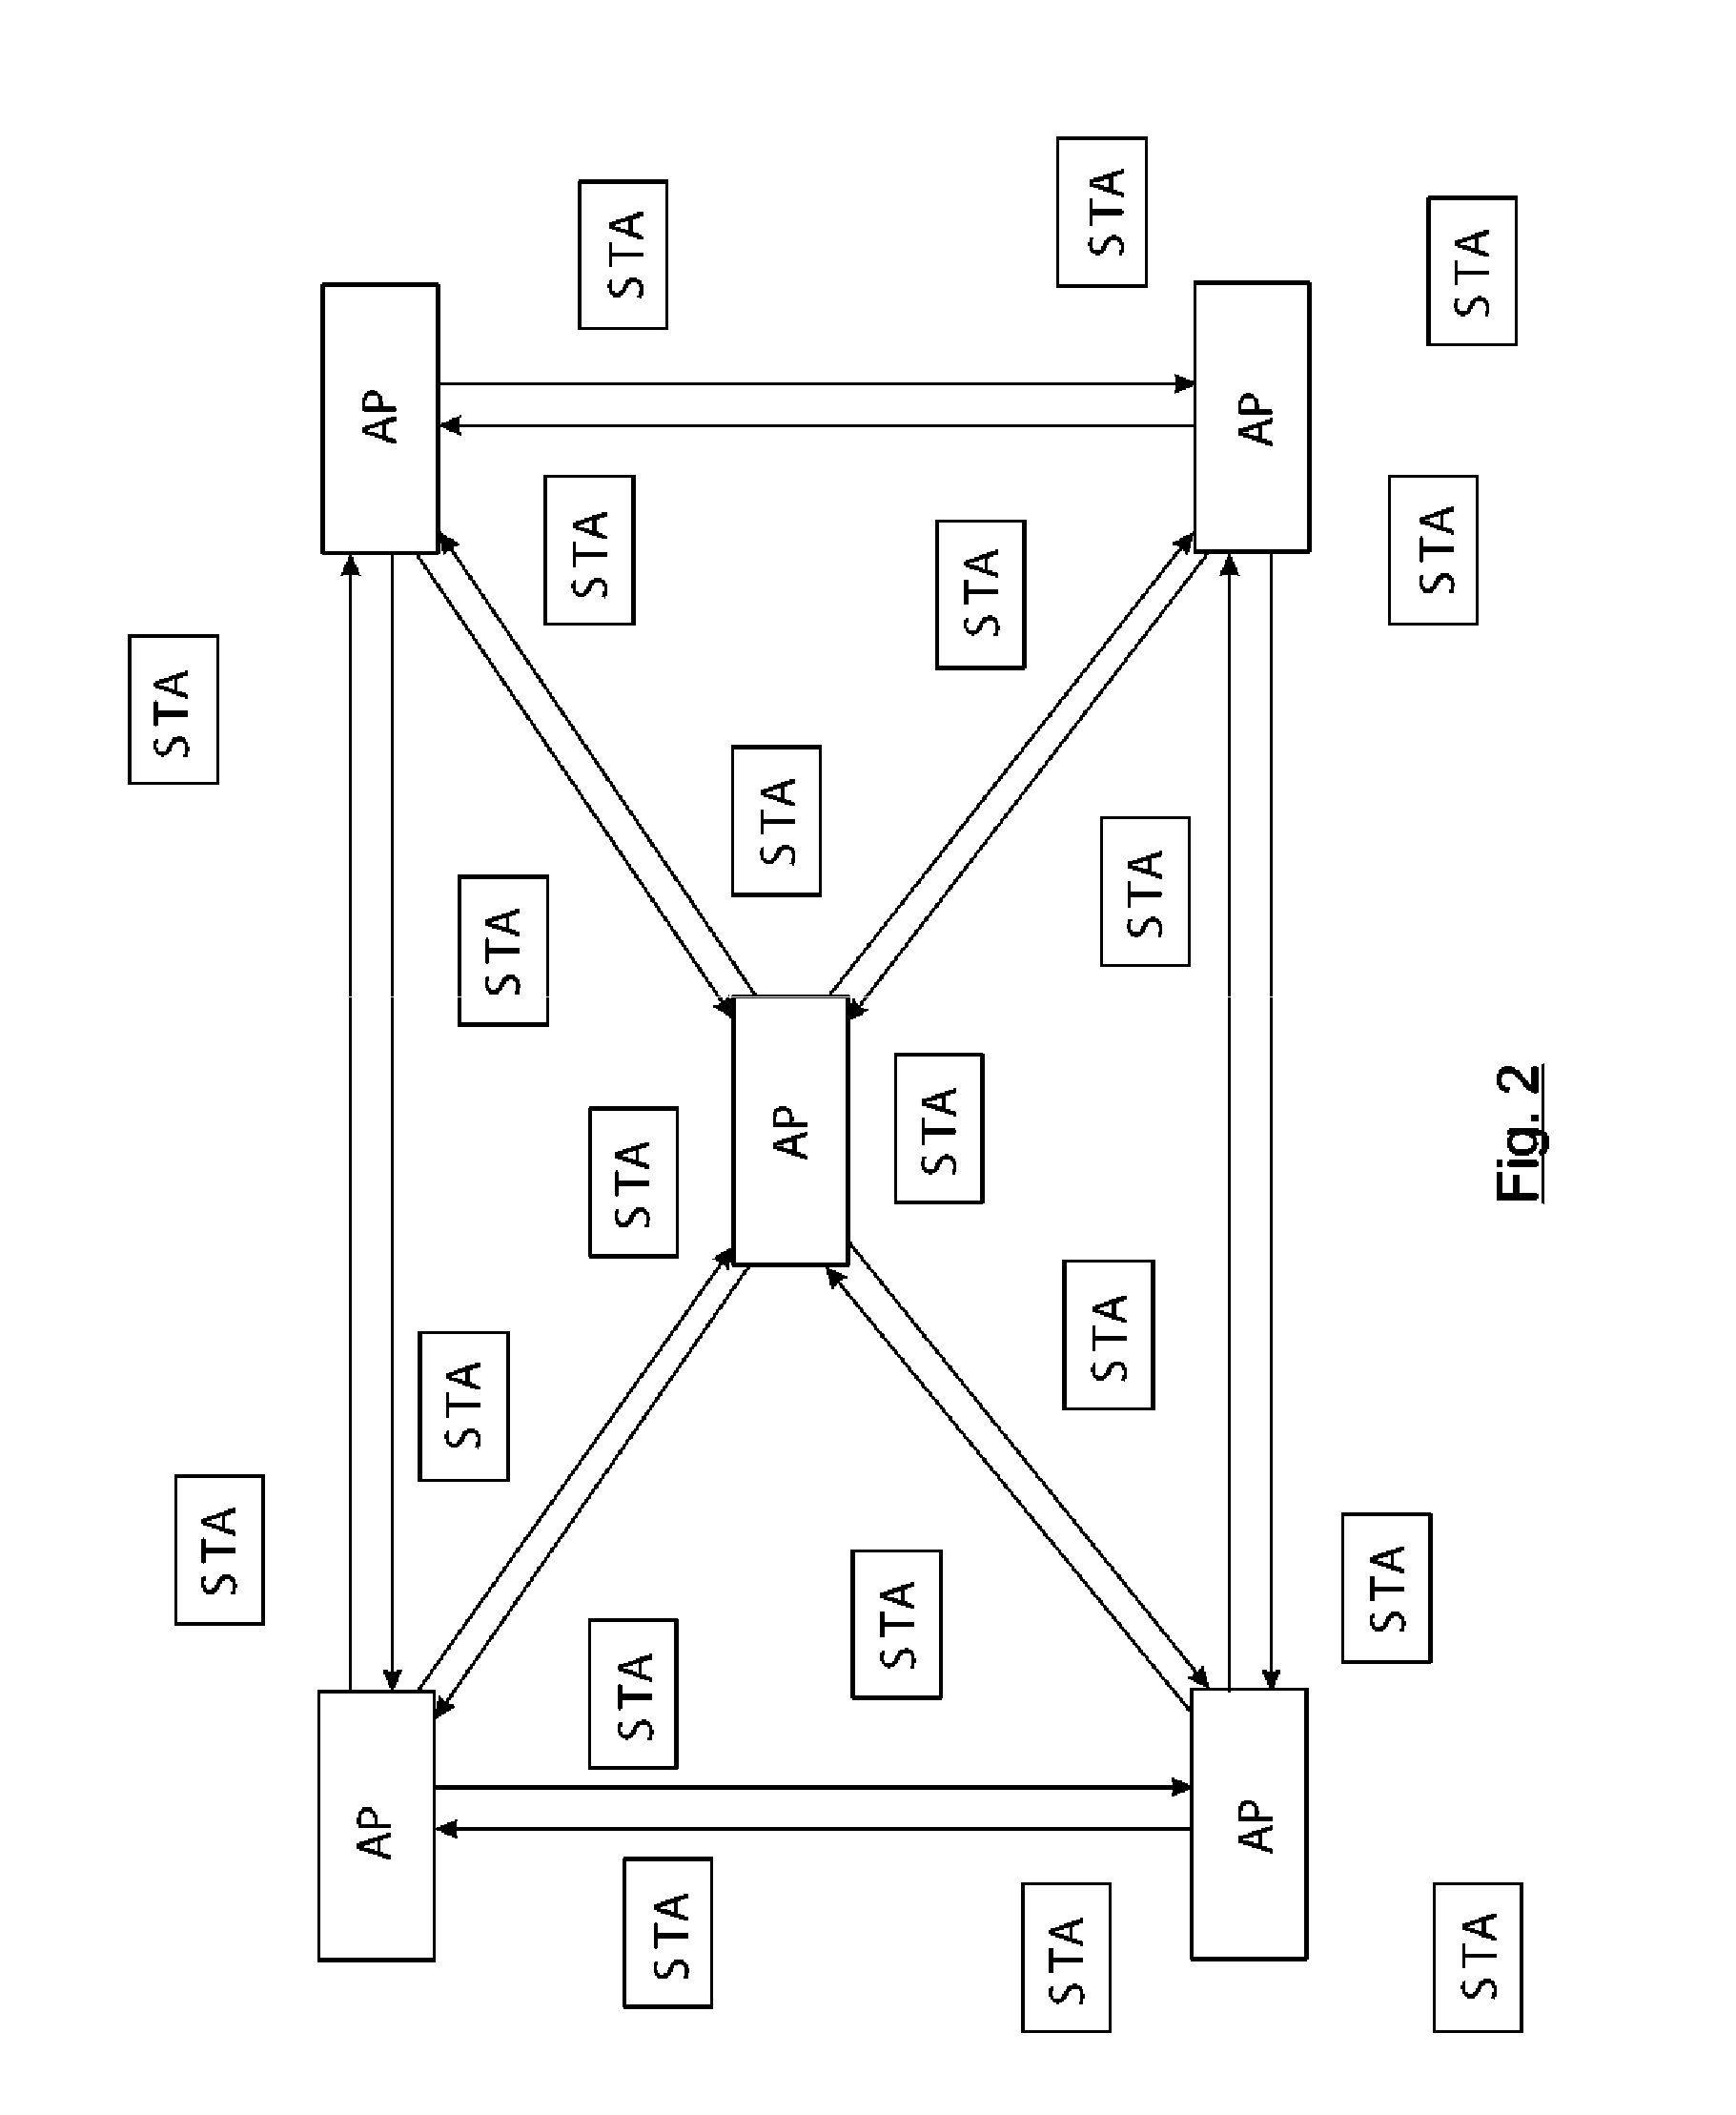 System and method for decentralized control of wireless networks